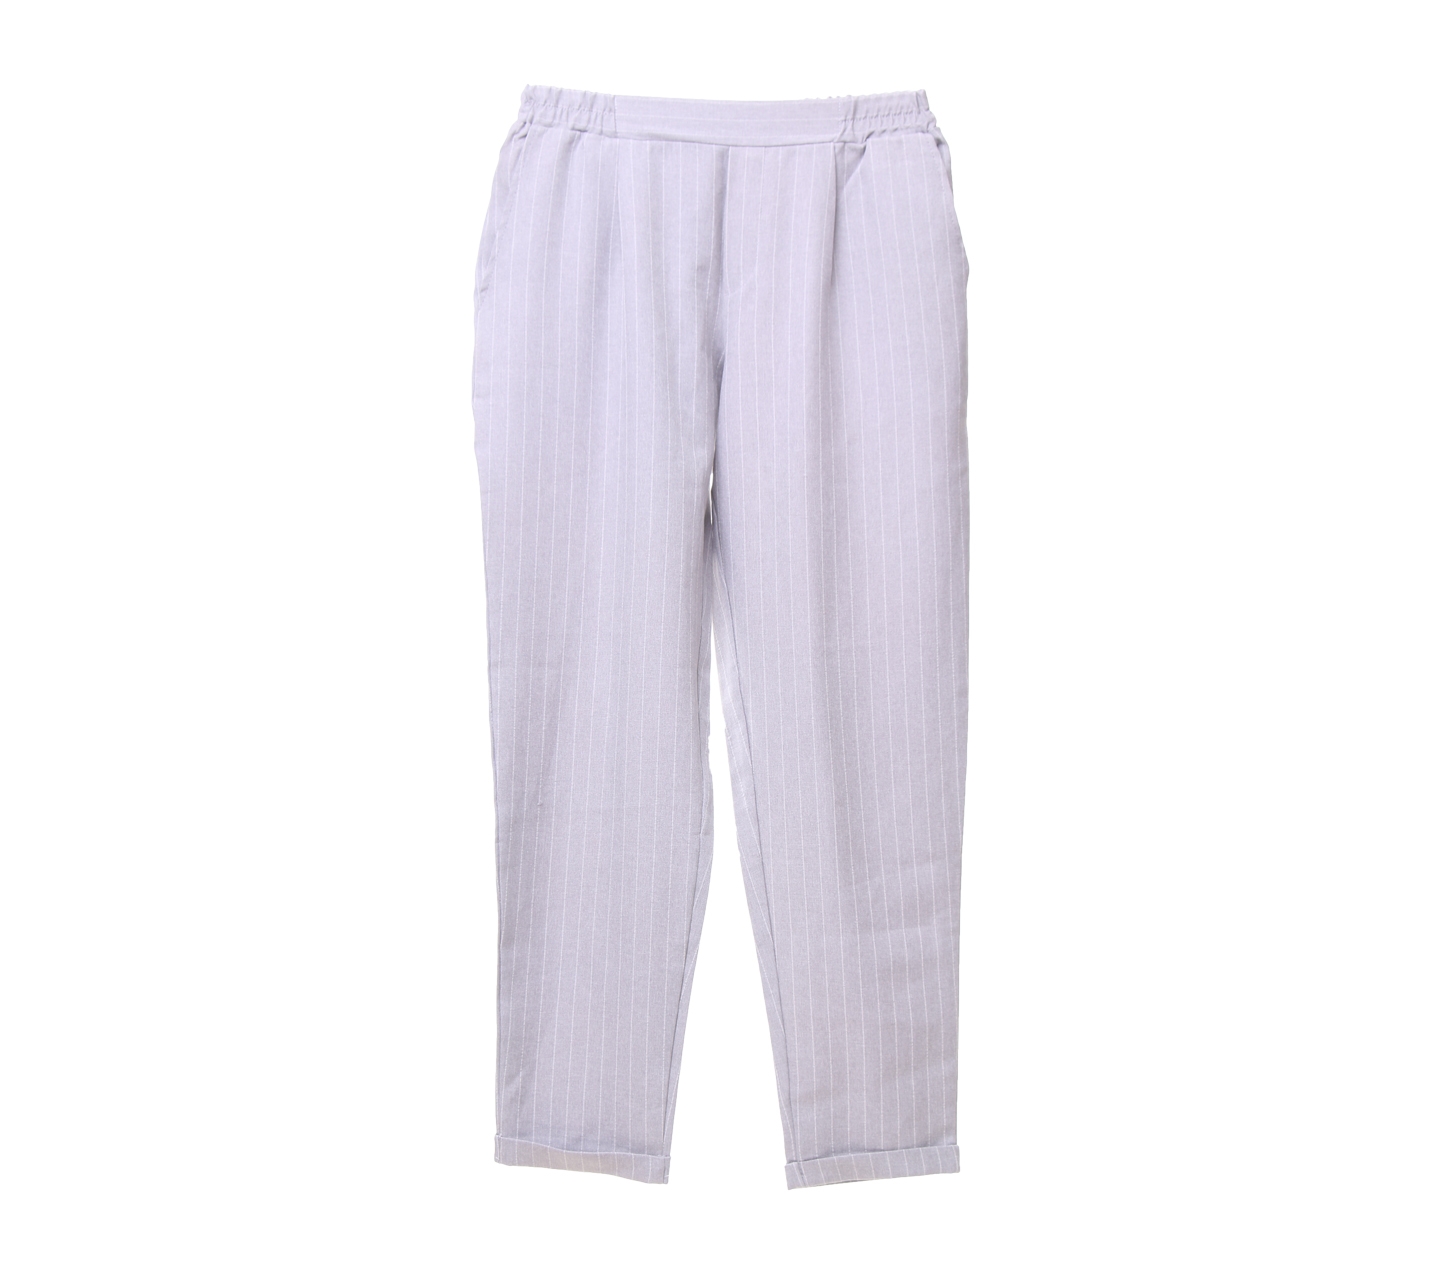 This Is April Grey Striped Long Pants